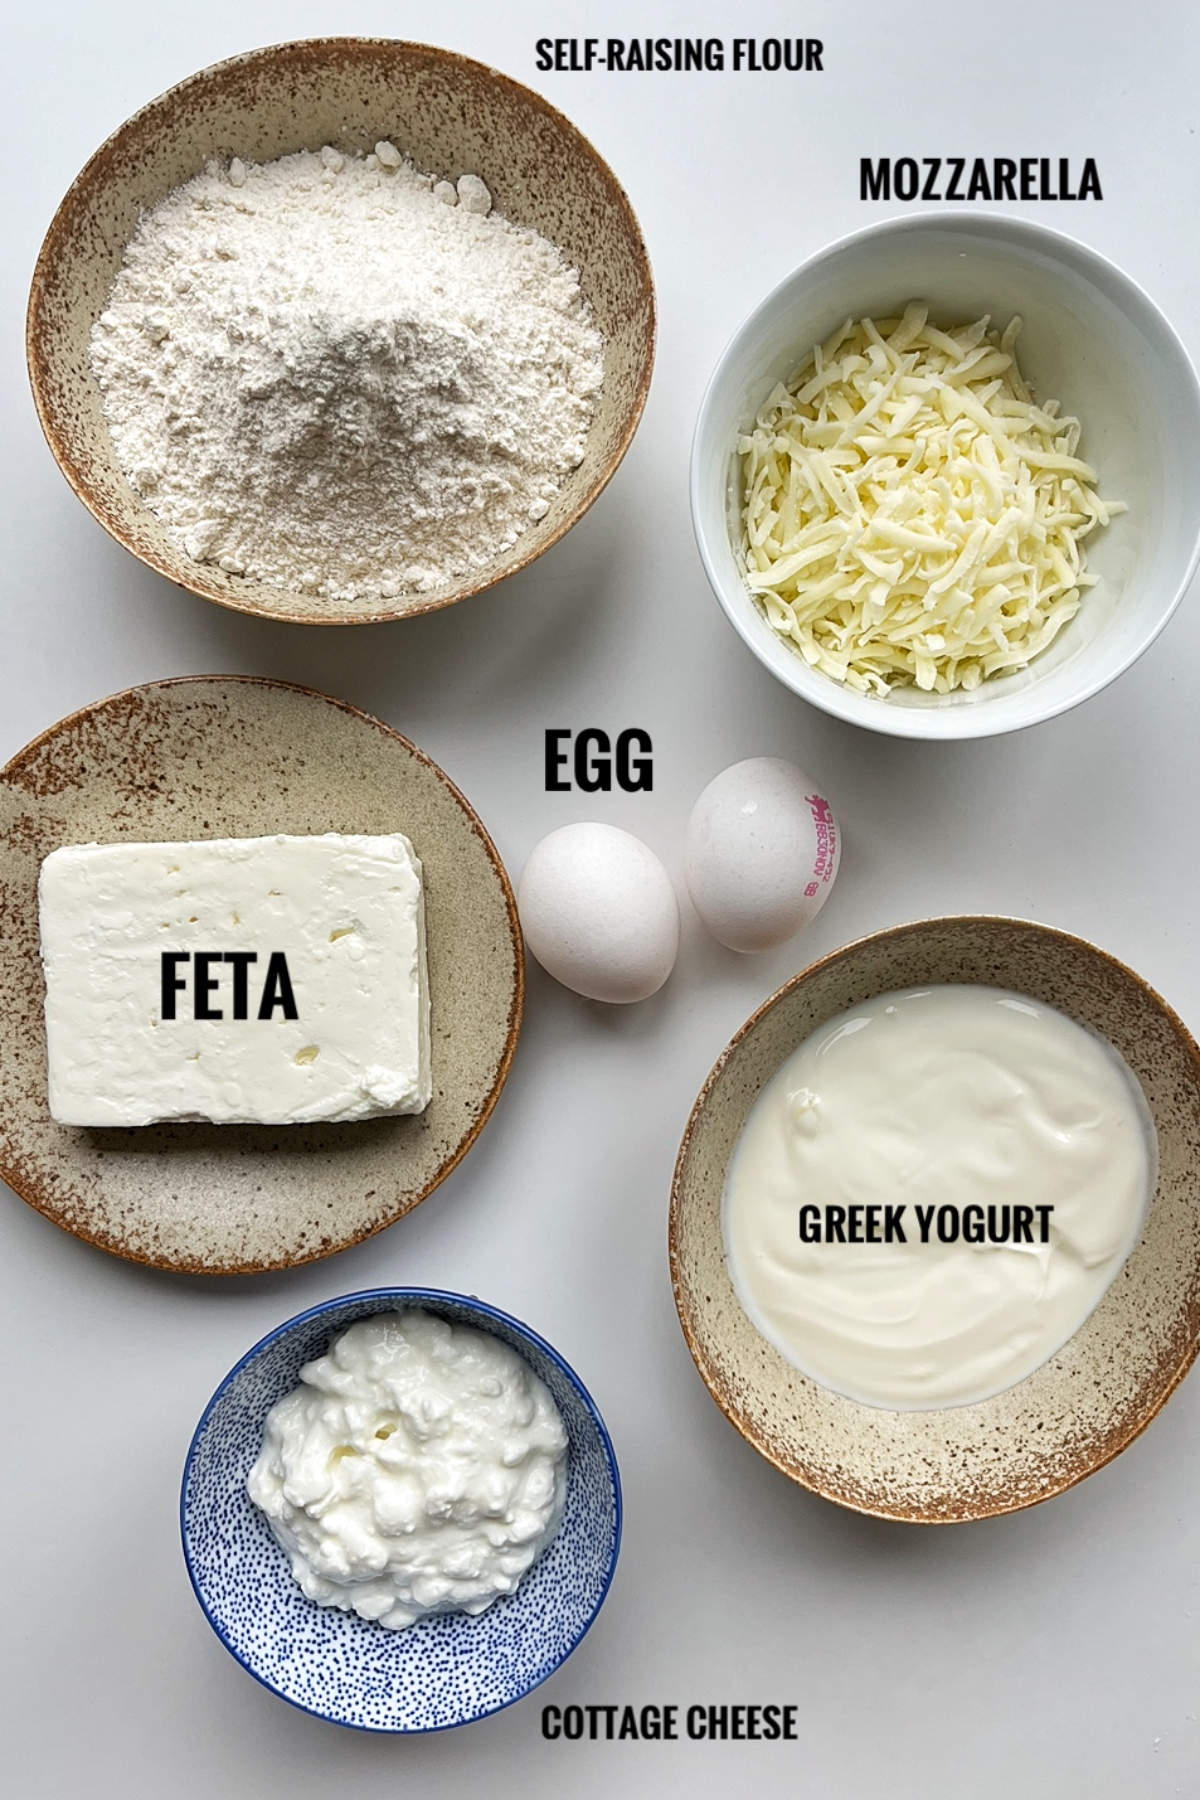 List of ingredients for cheese boat pies include self raising flour, mozzarella, feta, eggs, cottage cheese, and greek yoghurt. 